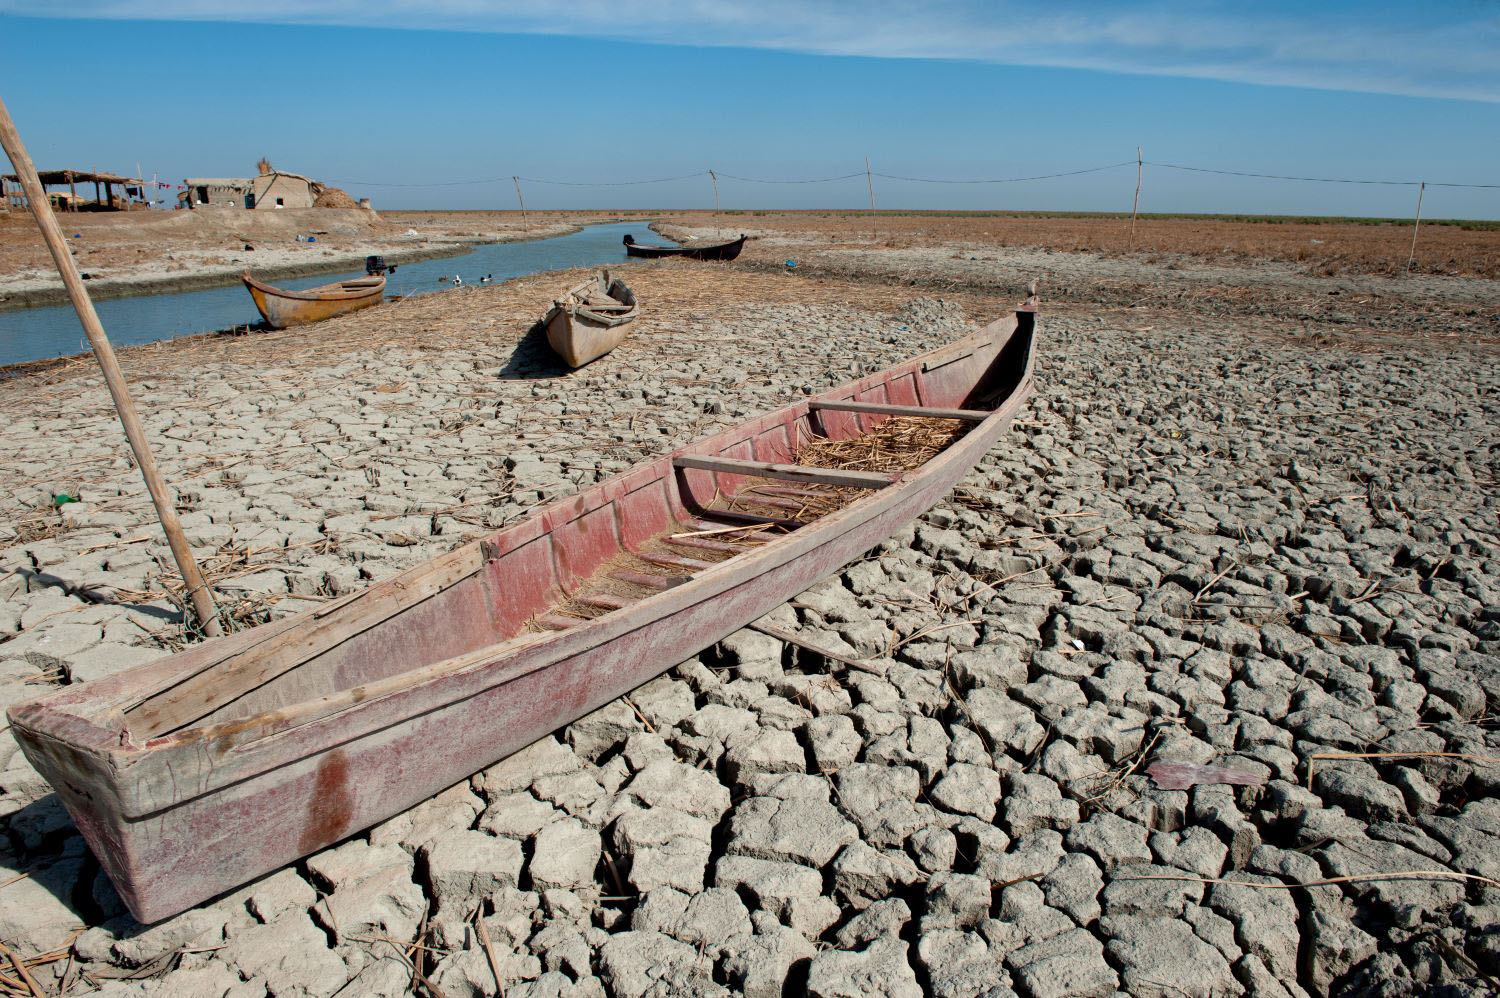 A traditional Marsh Arab canoe known as a Mashoof abandoned on the dry cracked earth of the southern marshes of Iraq during a hash summer drought.